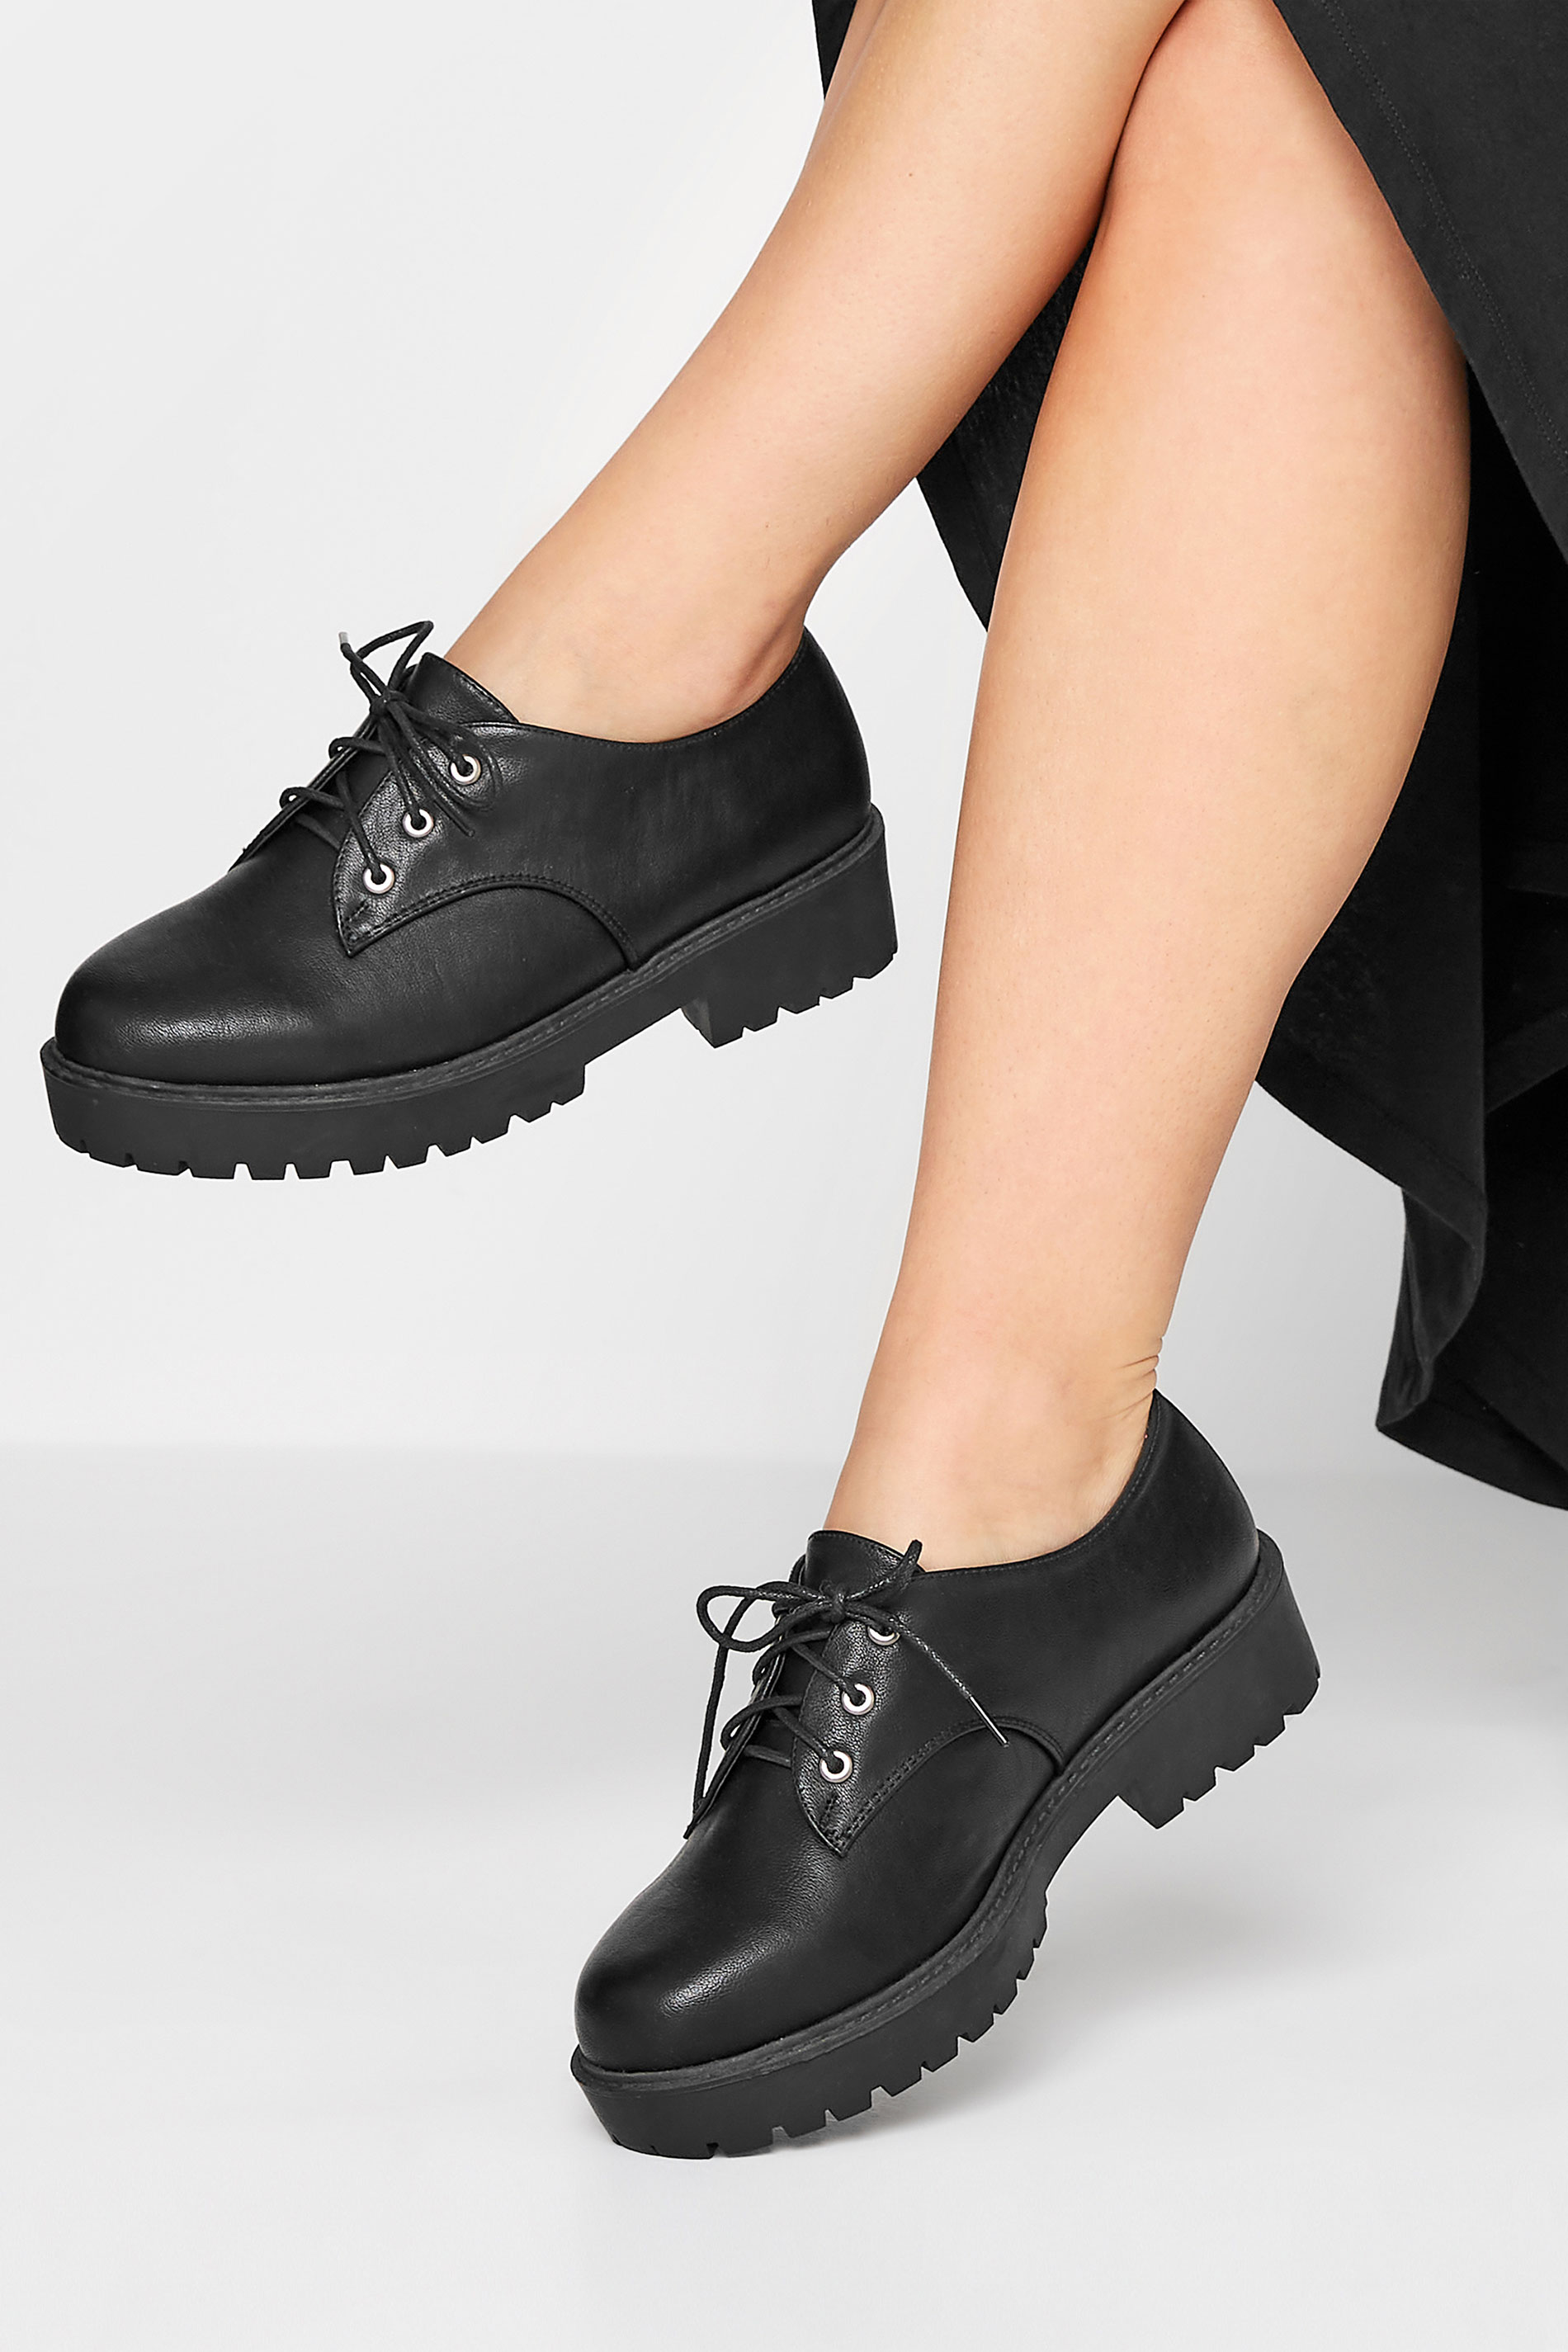 Black Chunky Lace Up Derby Shoes In Extra Wide EEE Fit 1